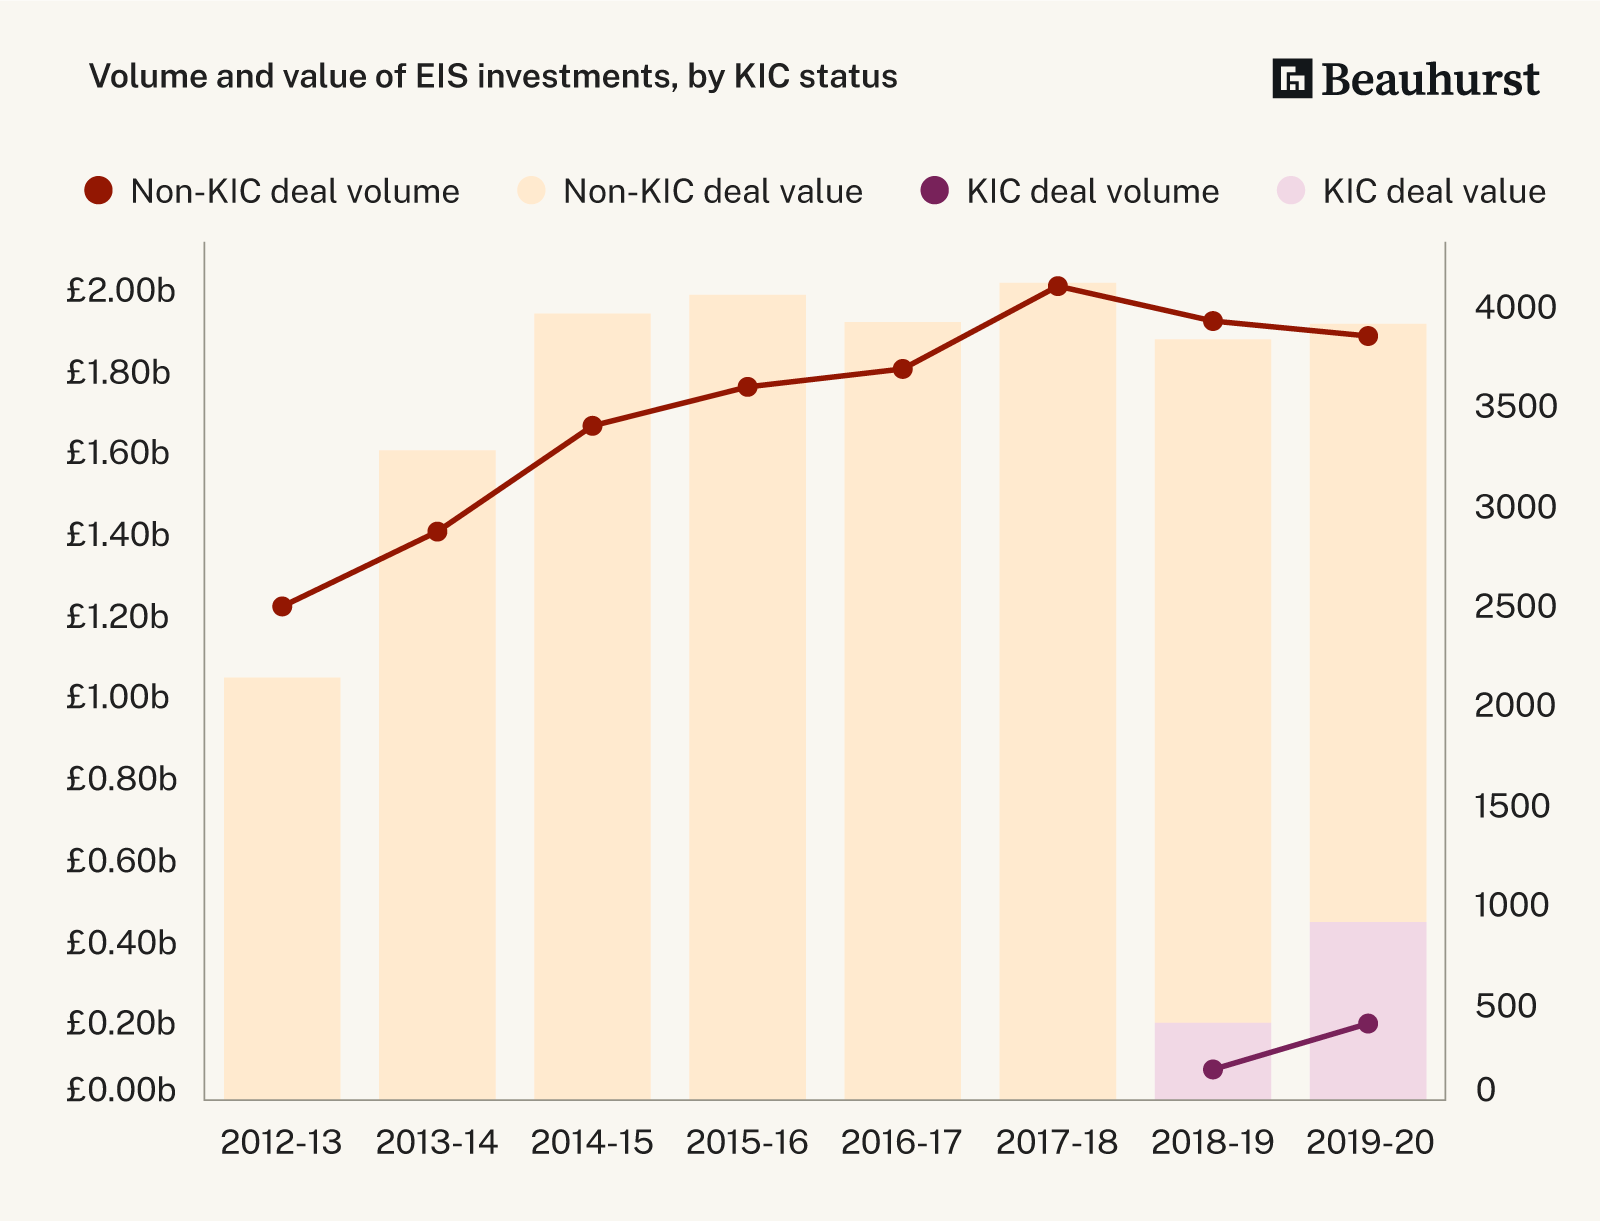 Volume and value of EIS investments by KIC status